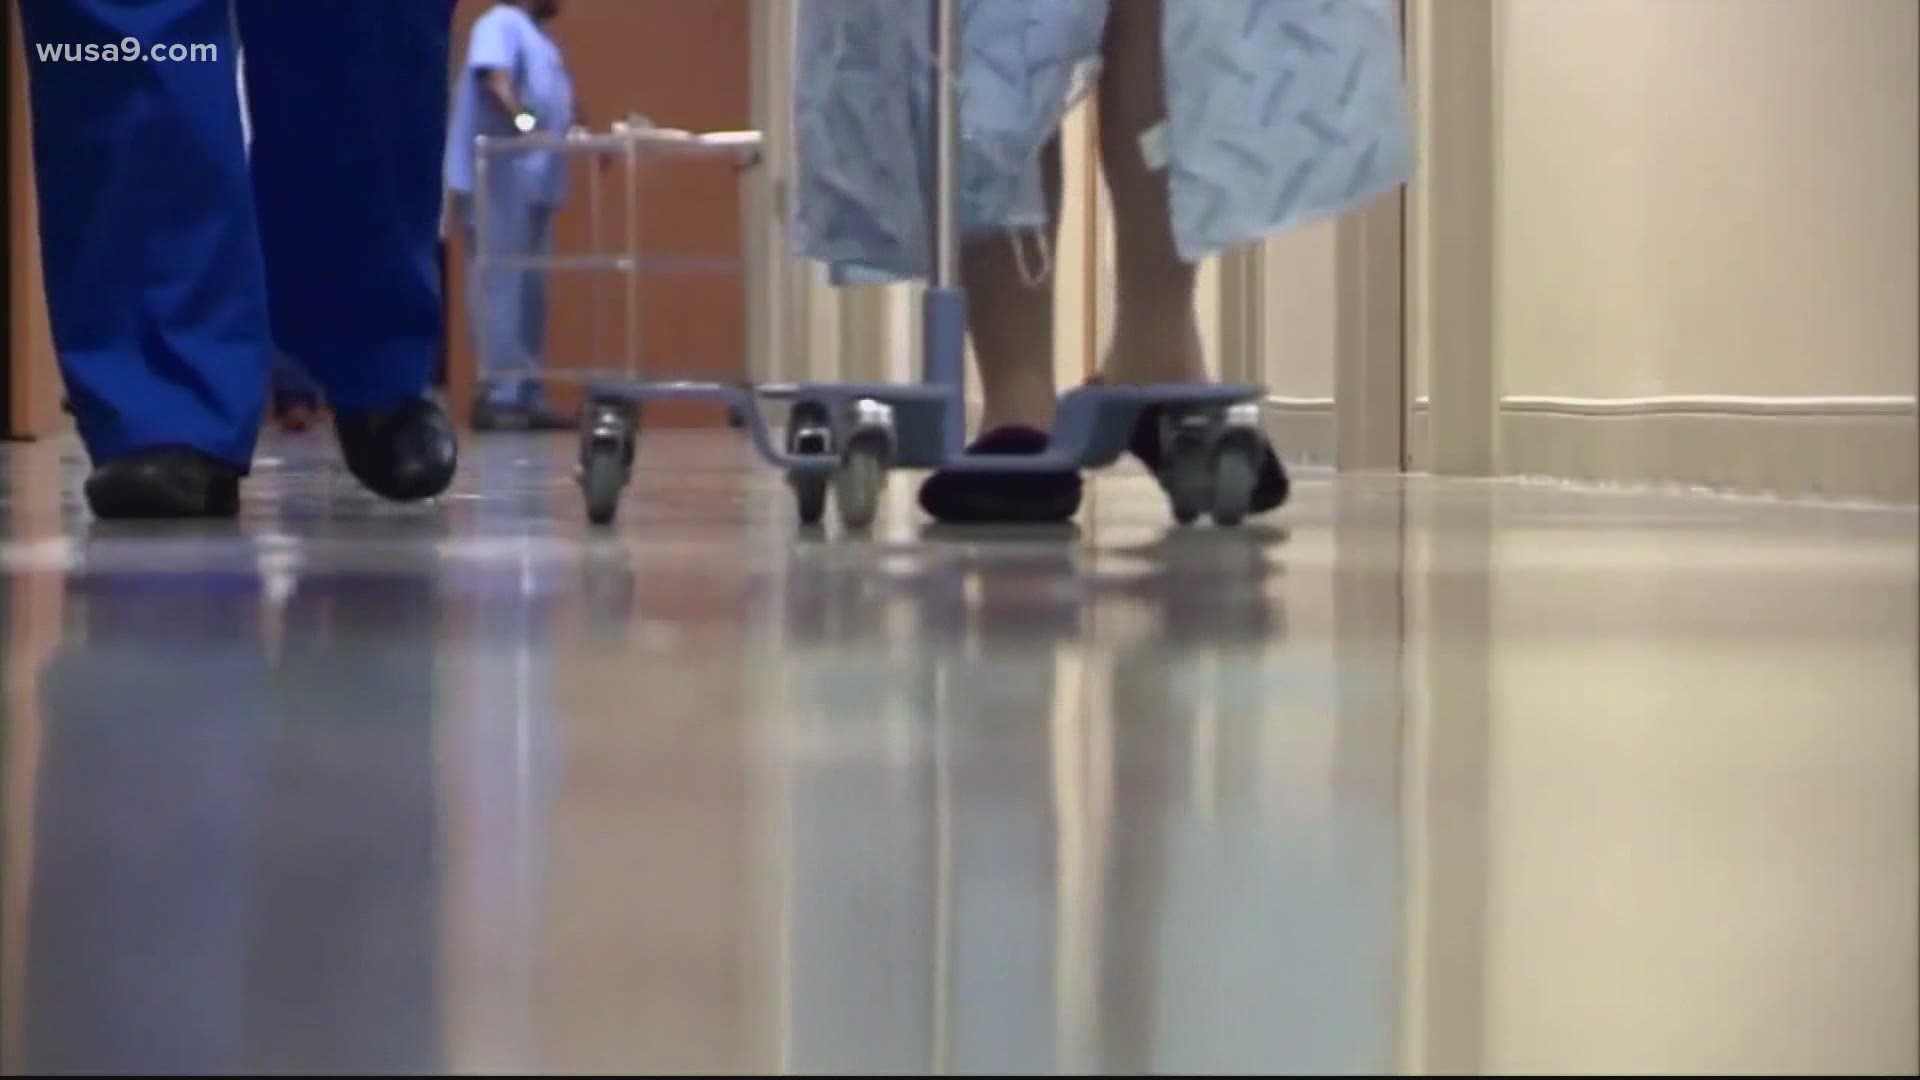 With Maryland seeing a record seven-day average for coronavirus cases, the Maryland Nurses Association spoke to WUSA9 about the issues facing medical workers.